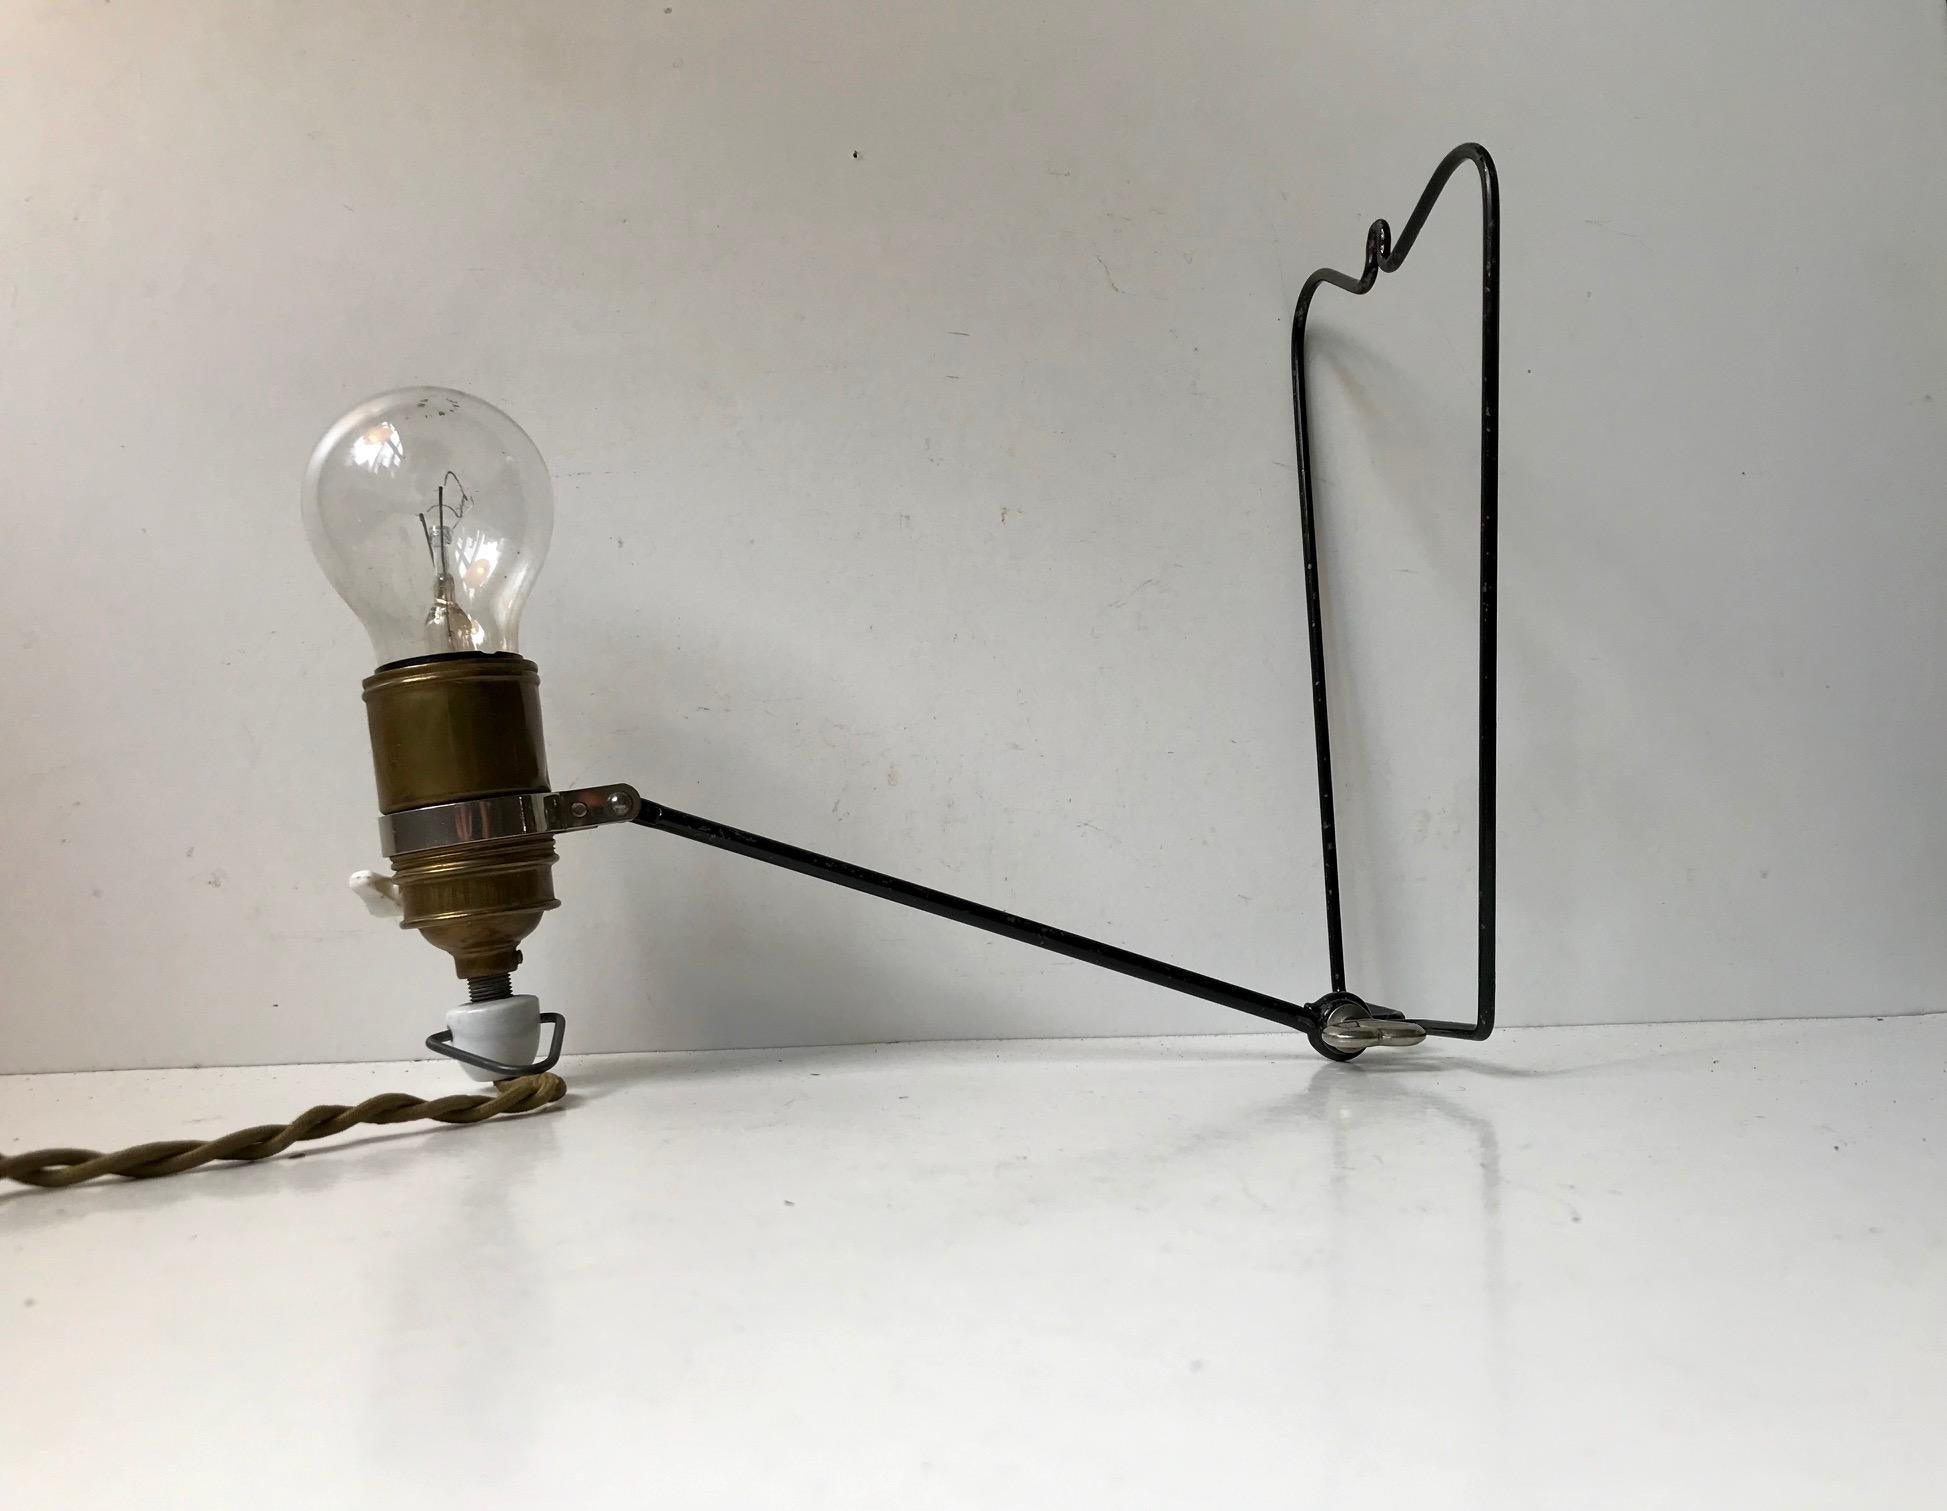 Minimal Industrial looking small wire table or wall light in its original raw state. It is adjustable and can be hung as a wall light or used as a small minimal desk lamp. It features porcelain switch and porcelain and brass socket - all original